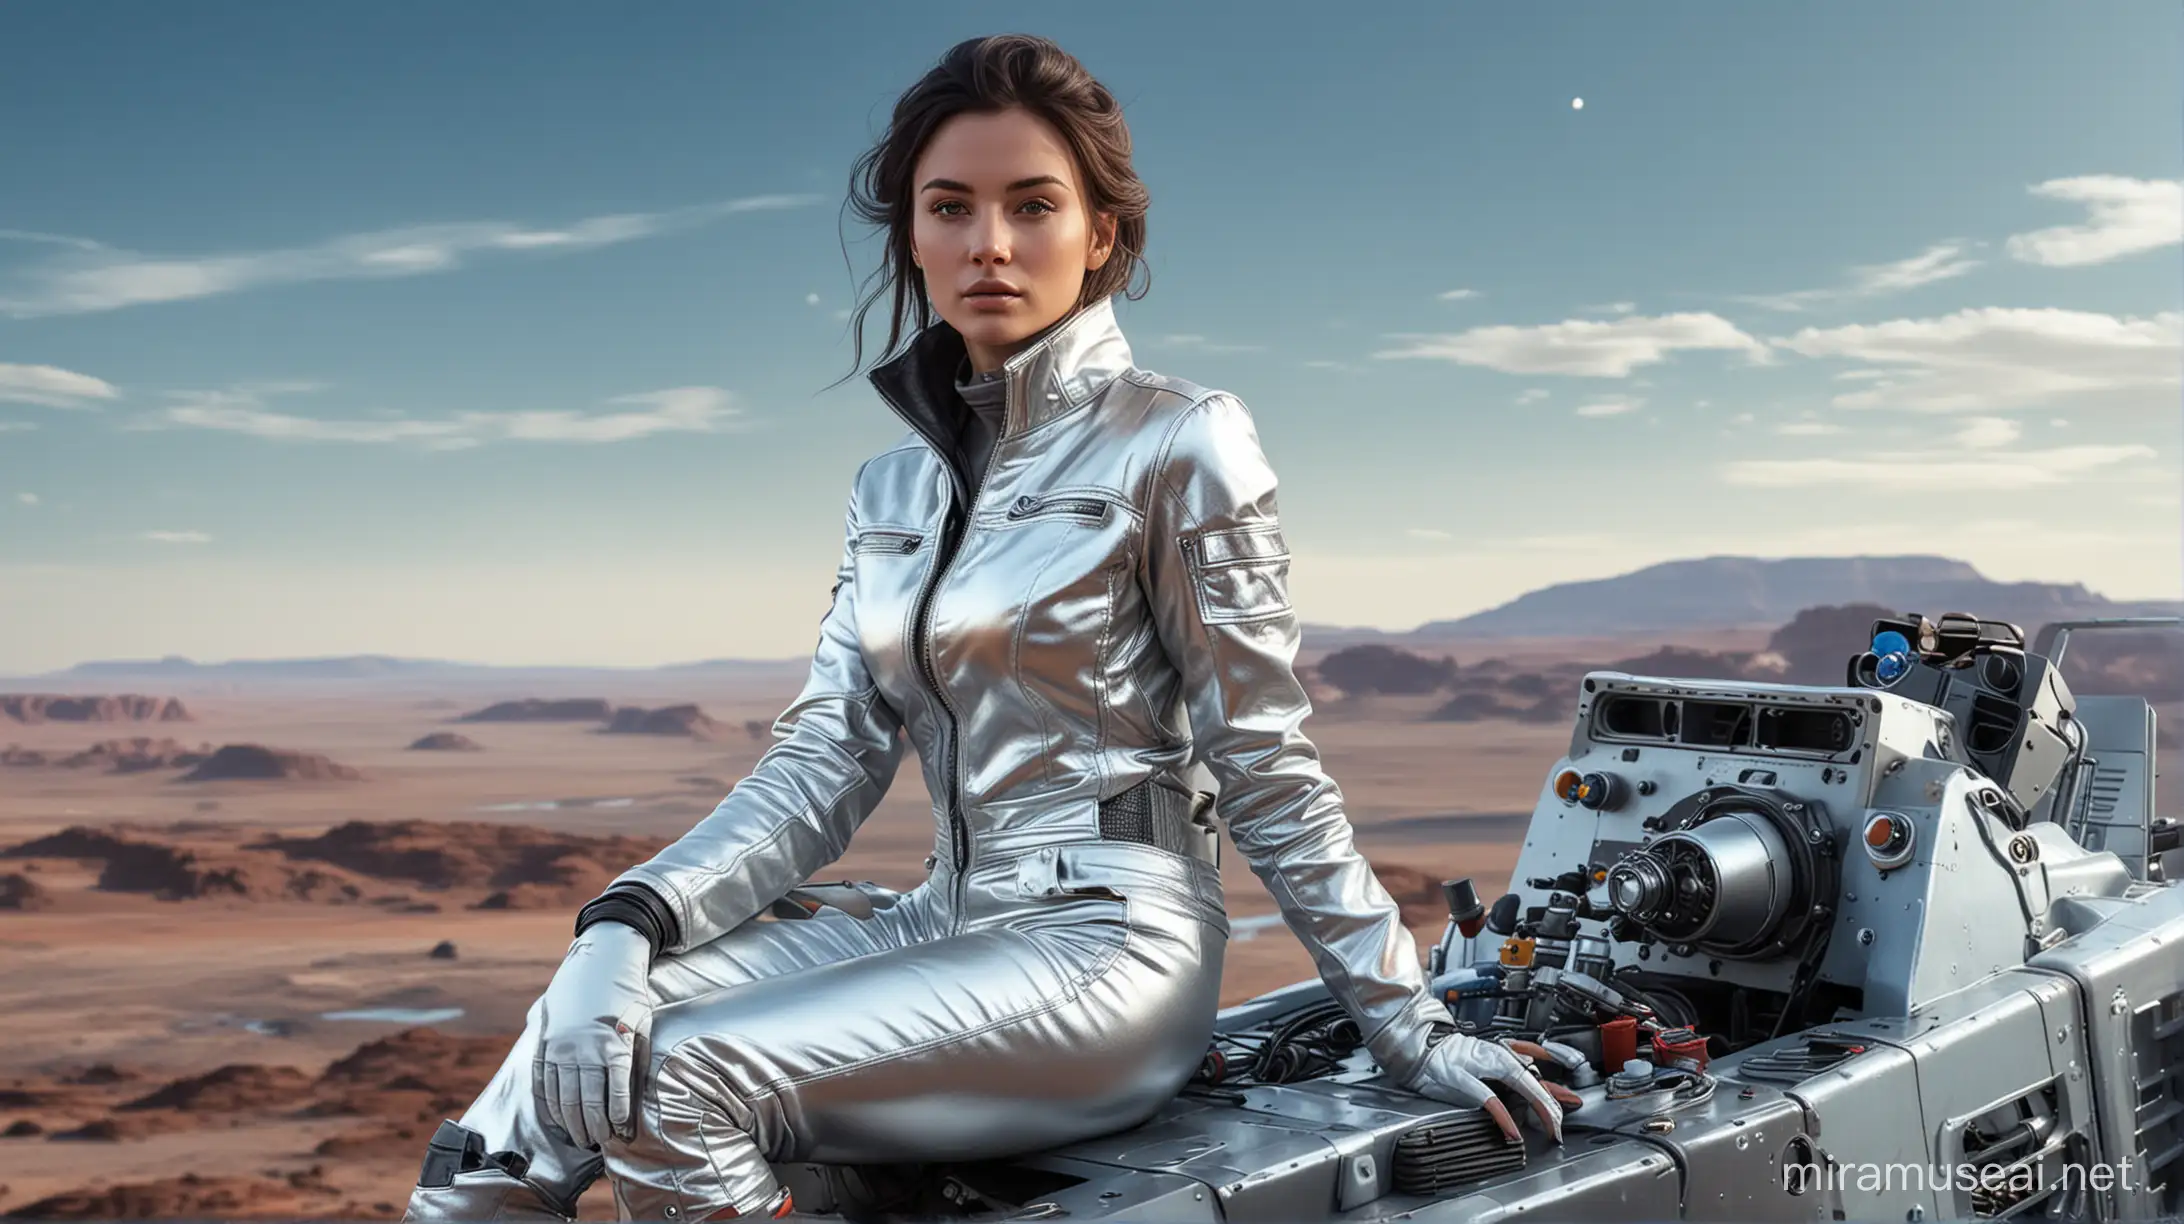 photo realistic, high quality, young kindly woman, dark hair, european face, wearing silver metallic jacket and pants, sitting on the sci-fi rover, background is surface of far planet with blu-white sky, beautiful color landscape.